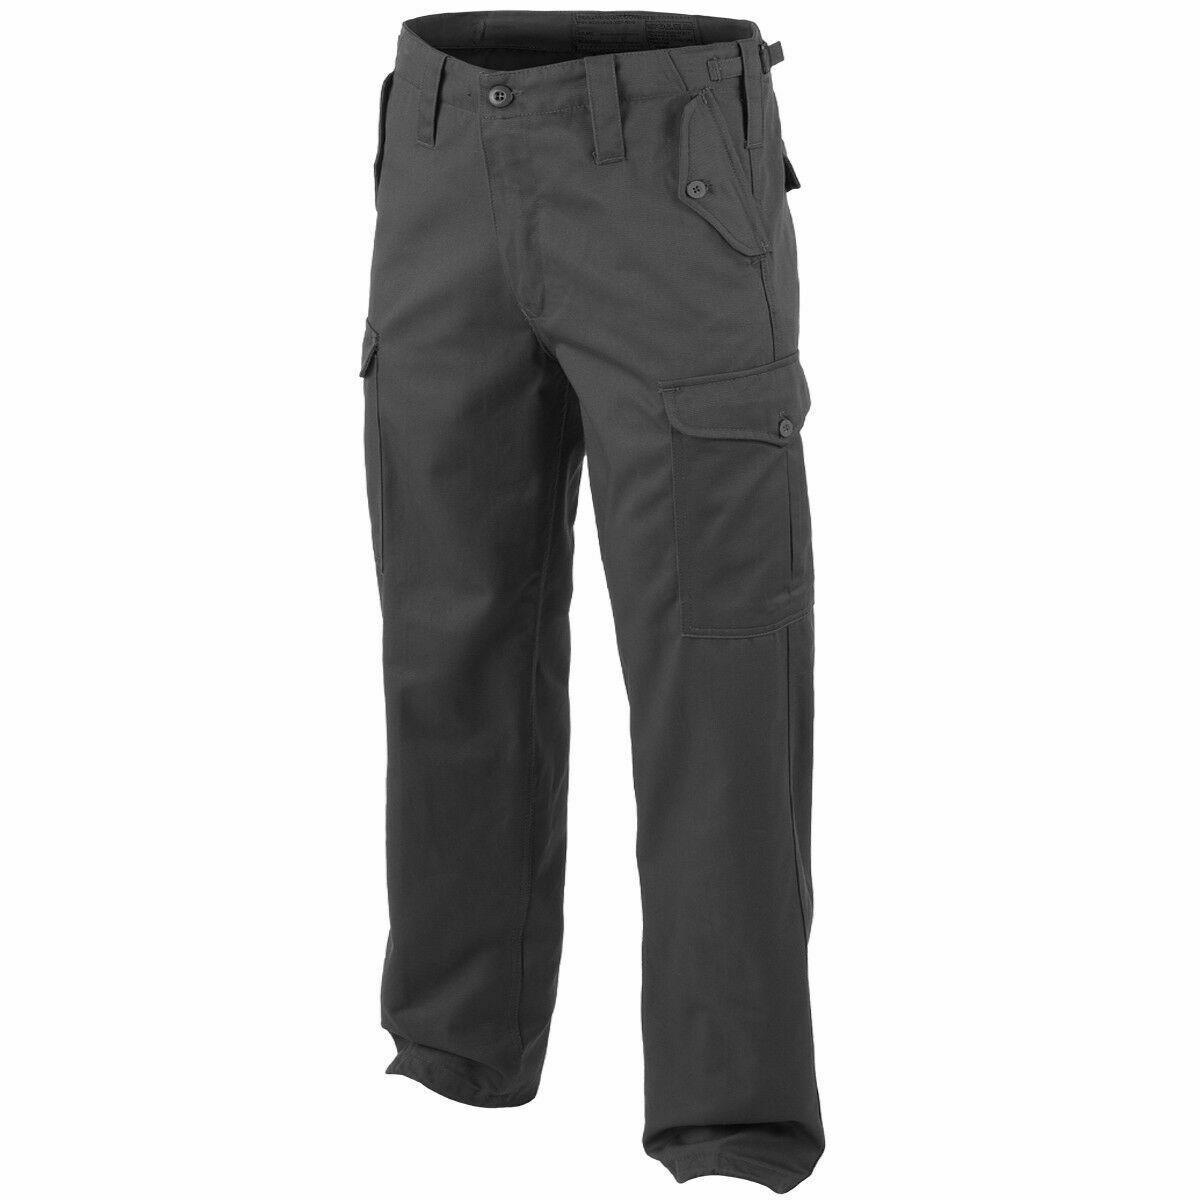 HIGHLANDER HEAVY WEIGHT PATROL COMBATS MENS CARGO TROUSERS SECURITY ...